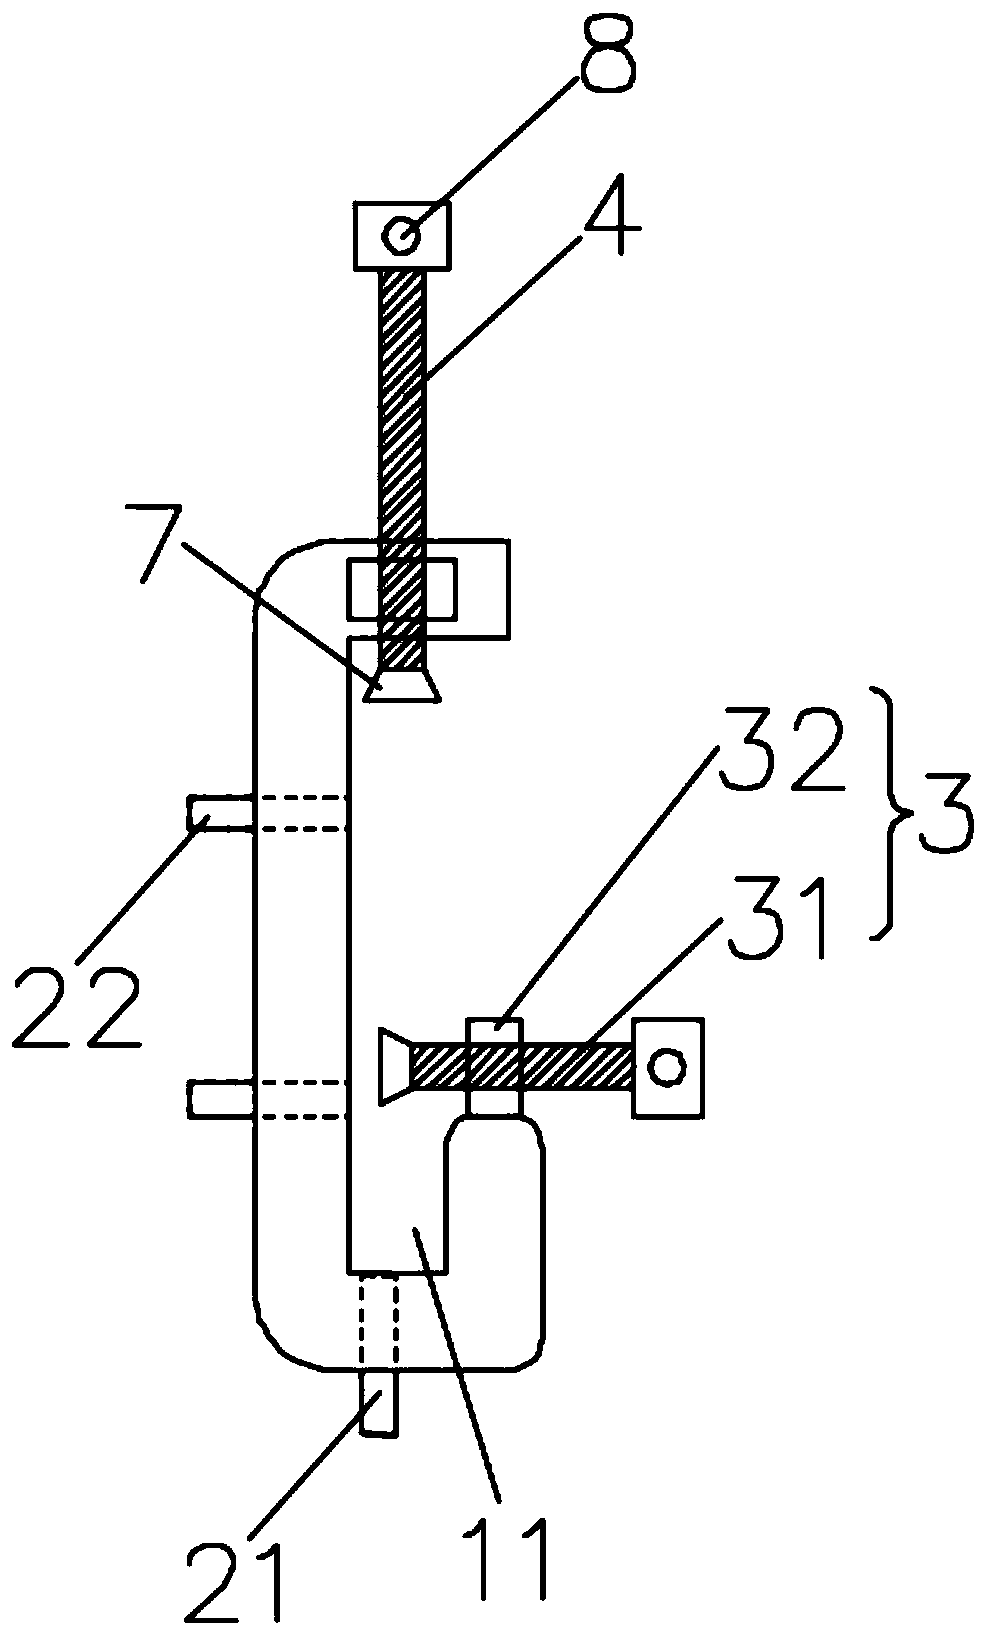 Auxiliary tool for section connection in ship hull construction